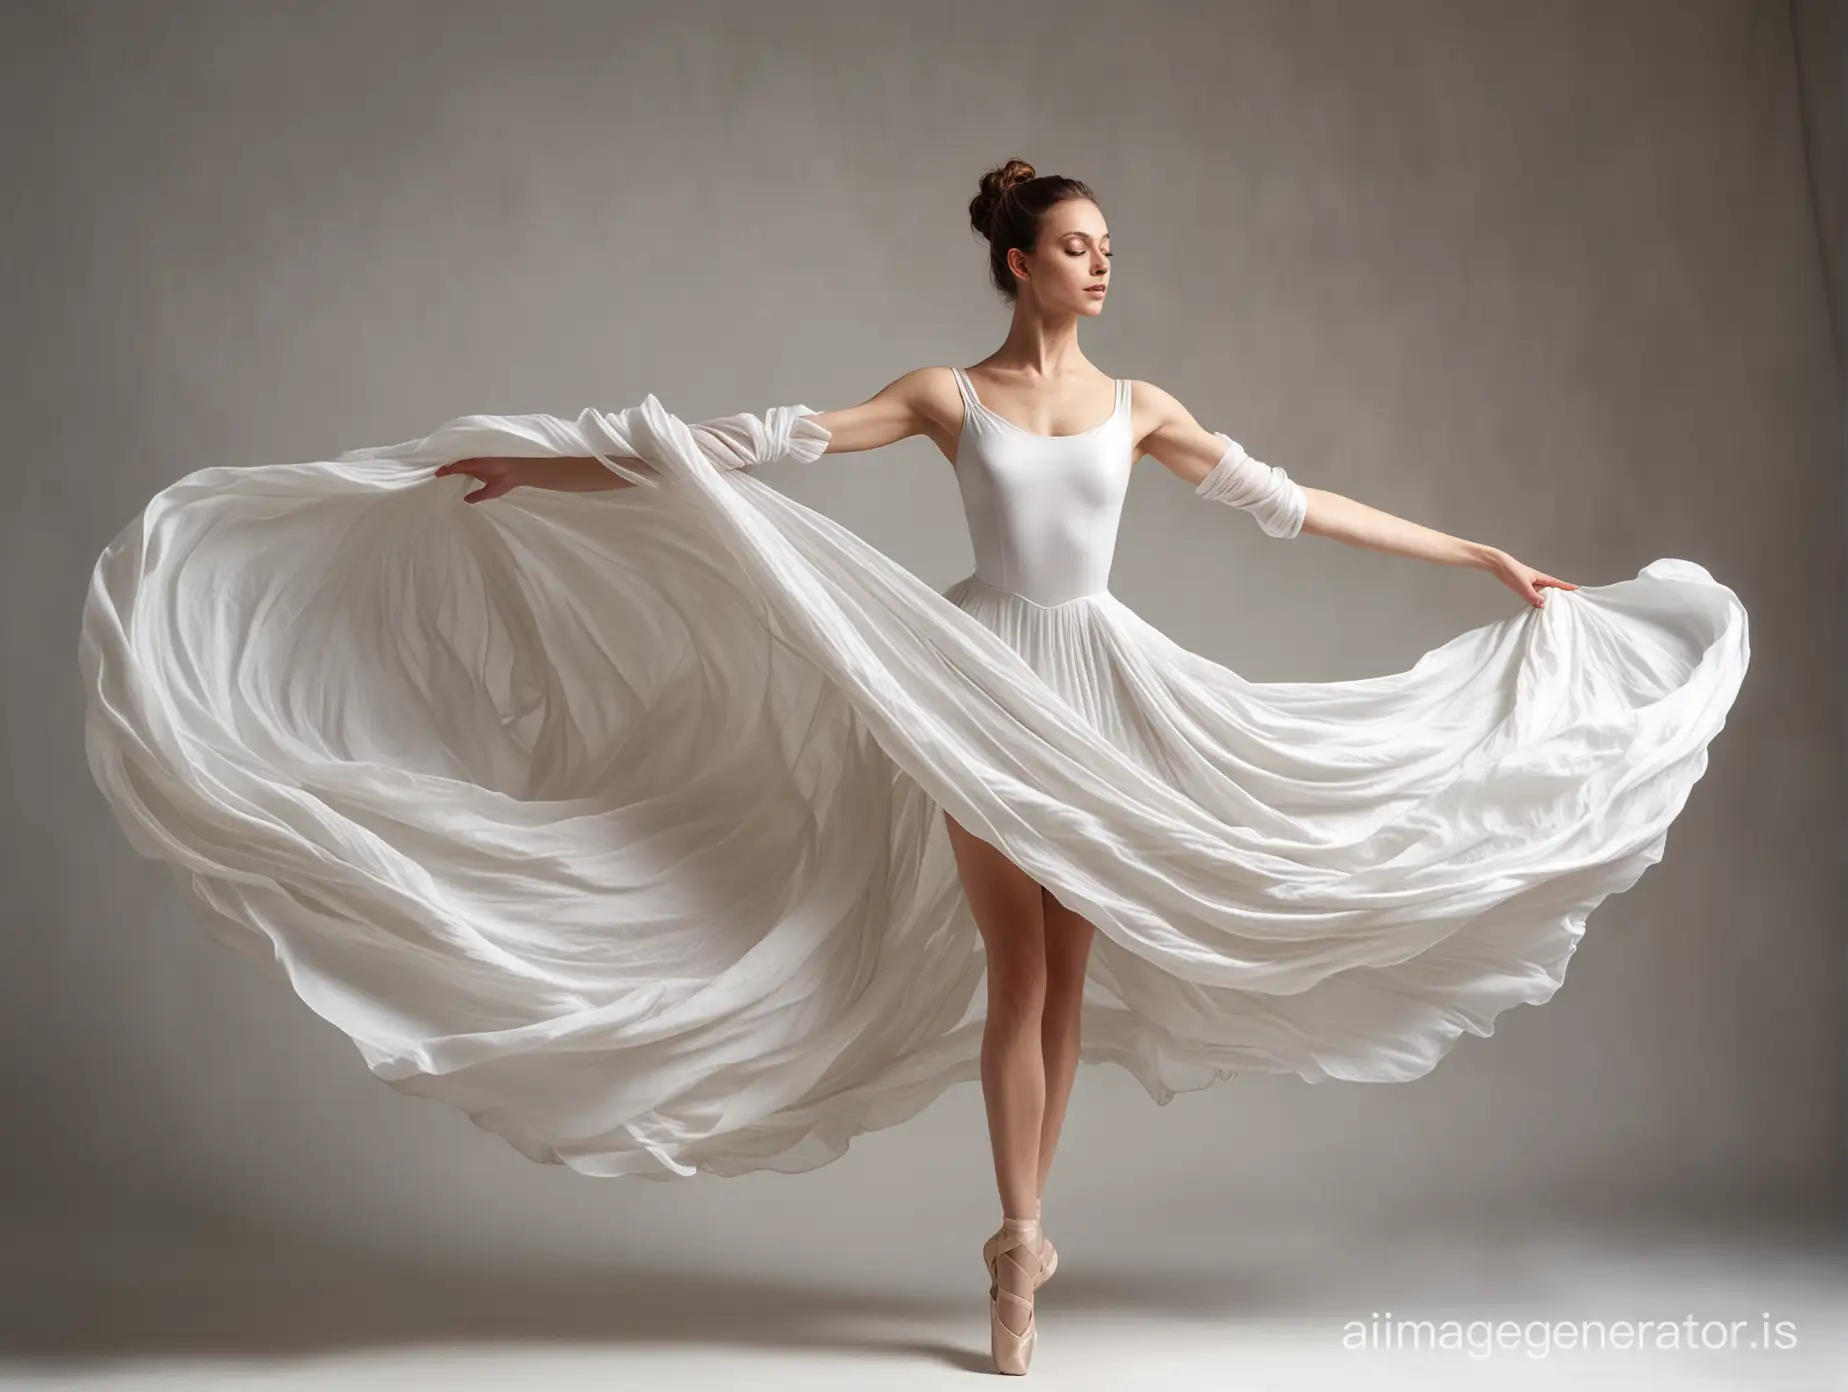 Graceful-Ballerina-Performing-Grand-Jet-Amidst-Flowing-Silk-Fabric